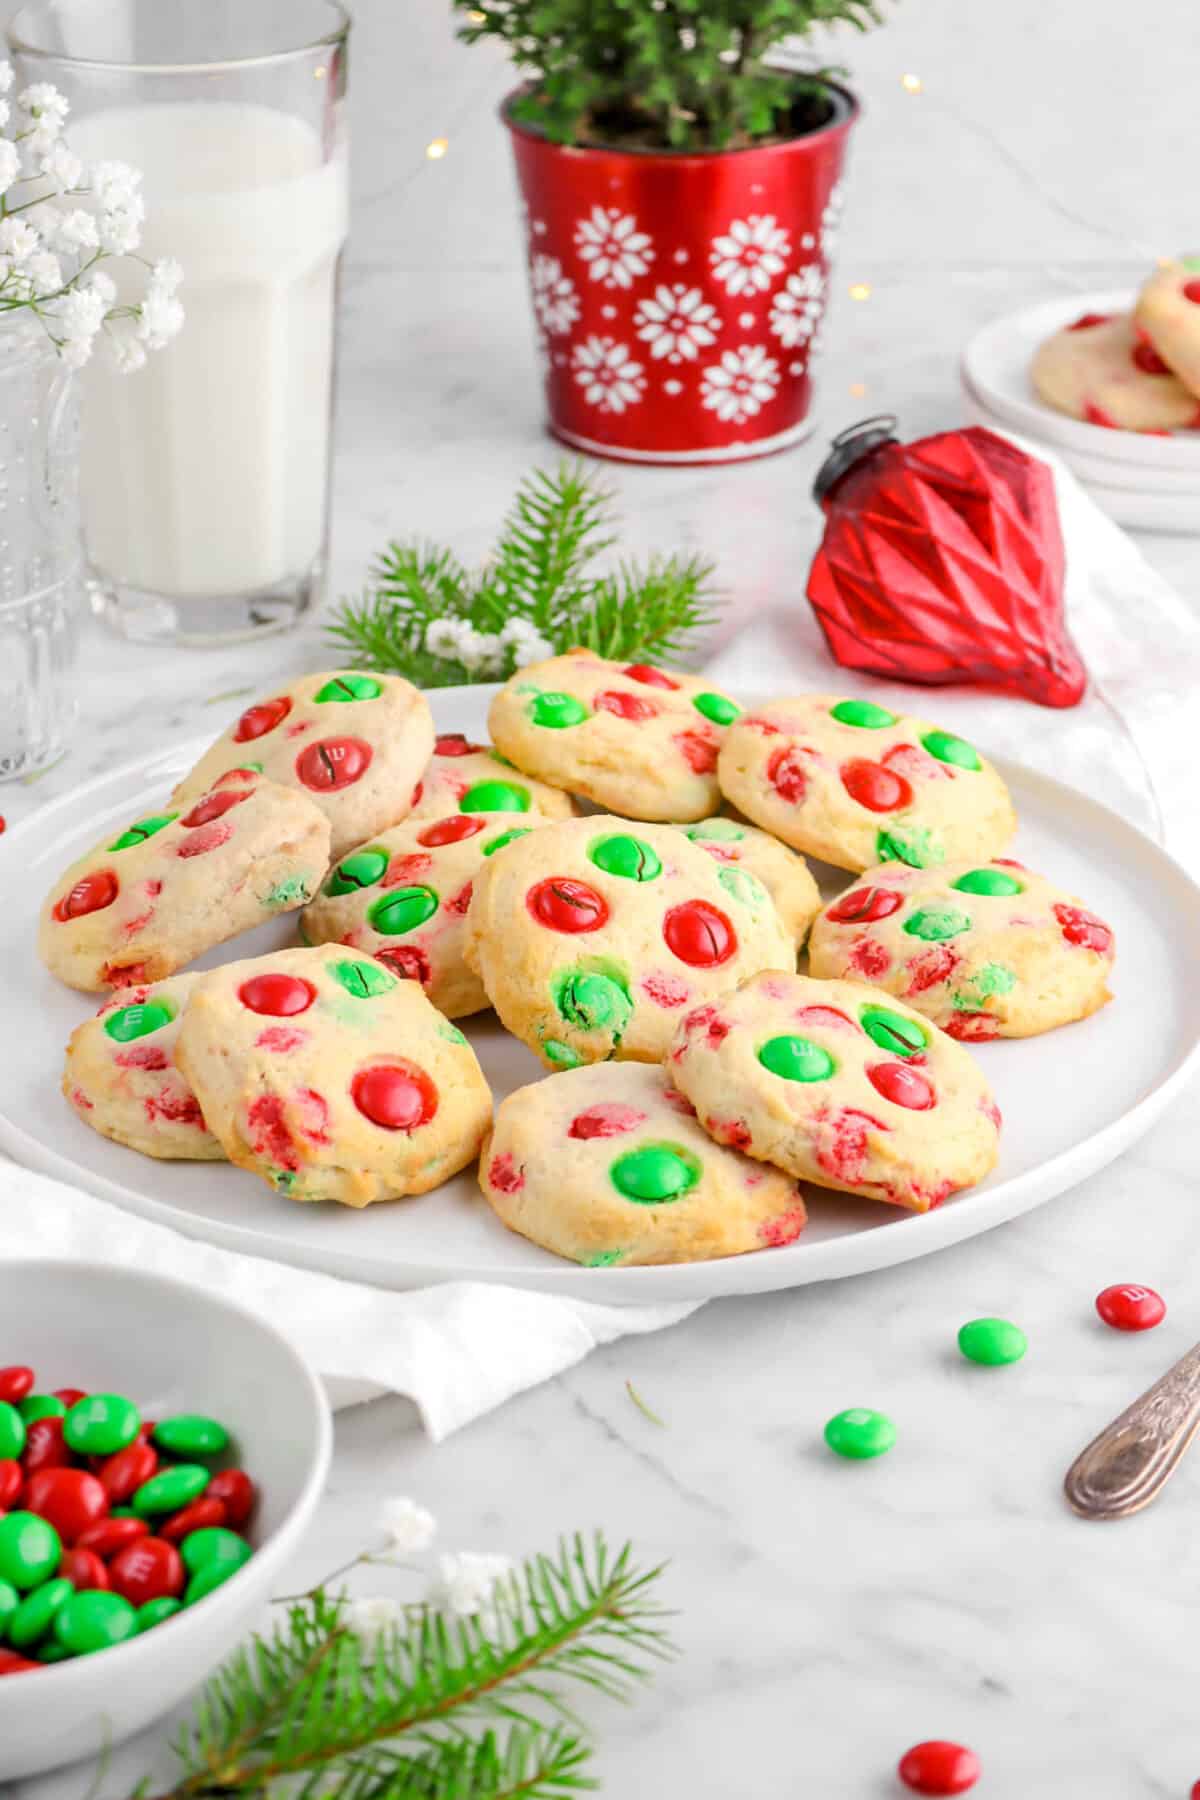 m&m cookies on white plate with red ornament behind, glass of milk, and ever green branches